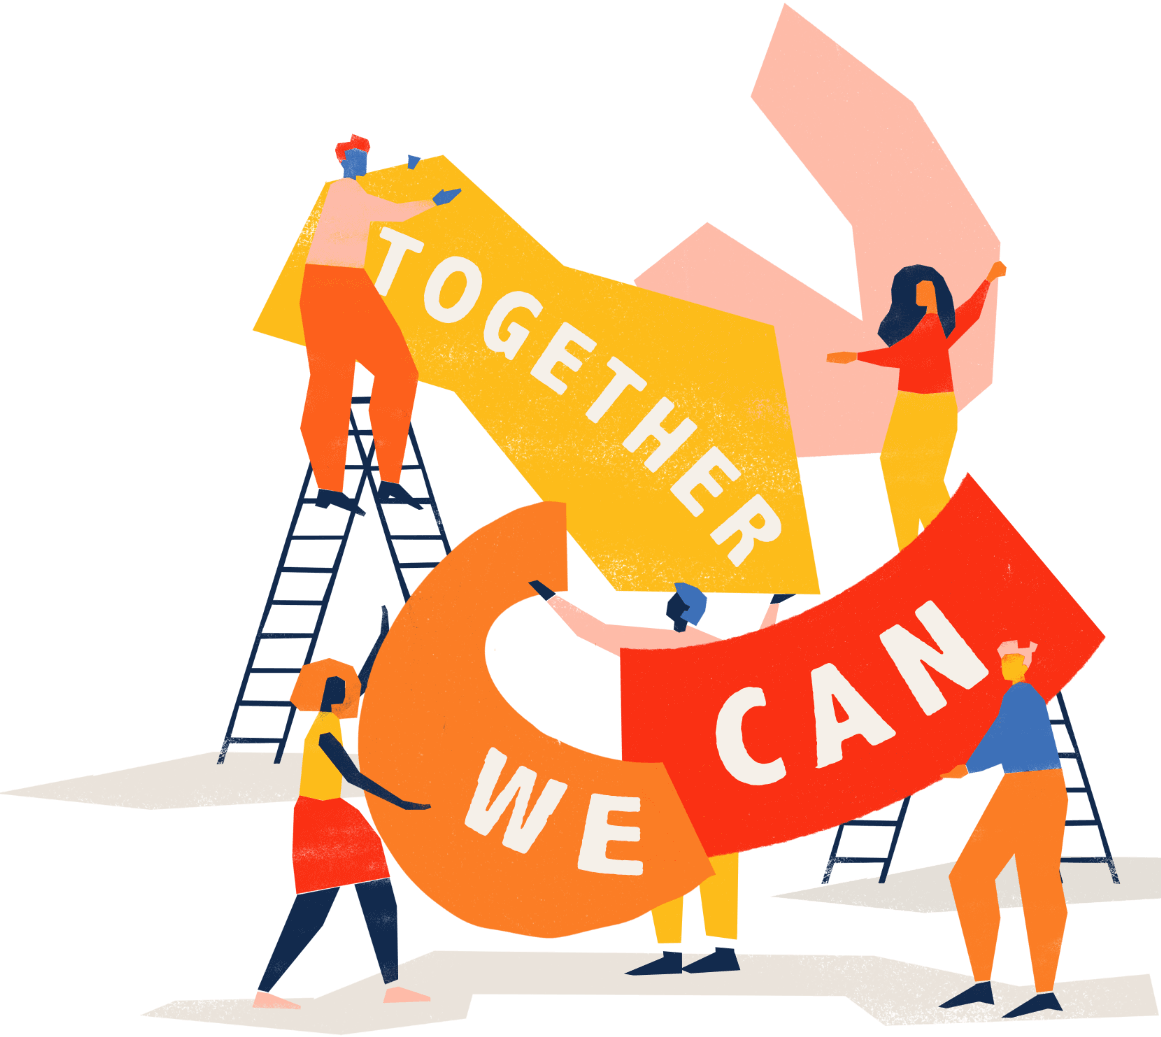 Together We Can: Summit 2022 - Transition Together